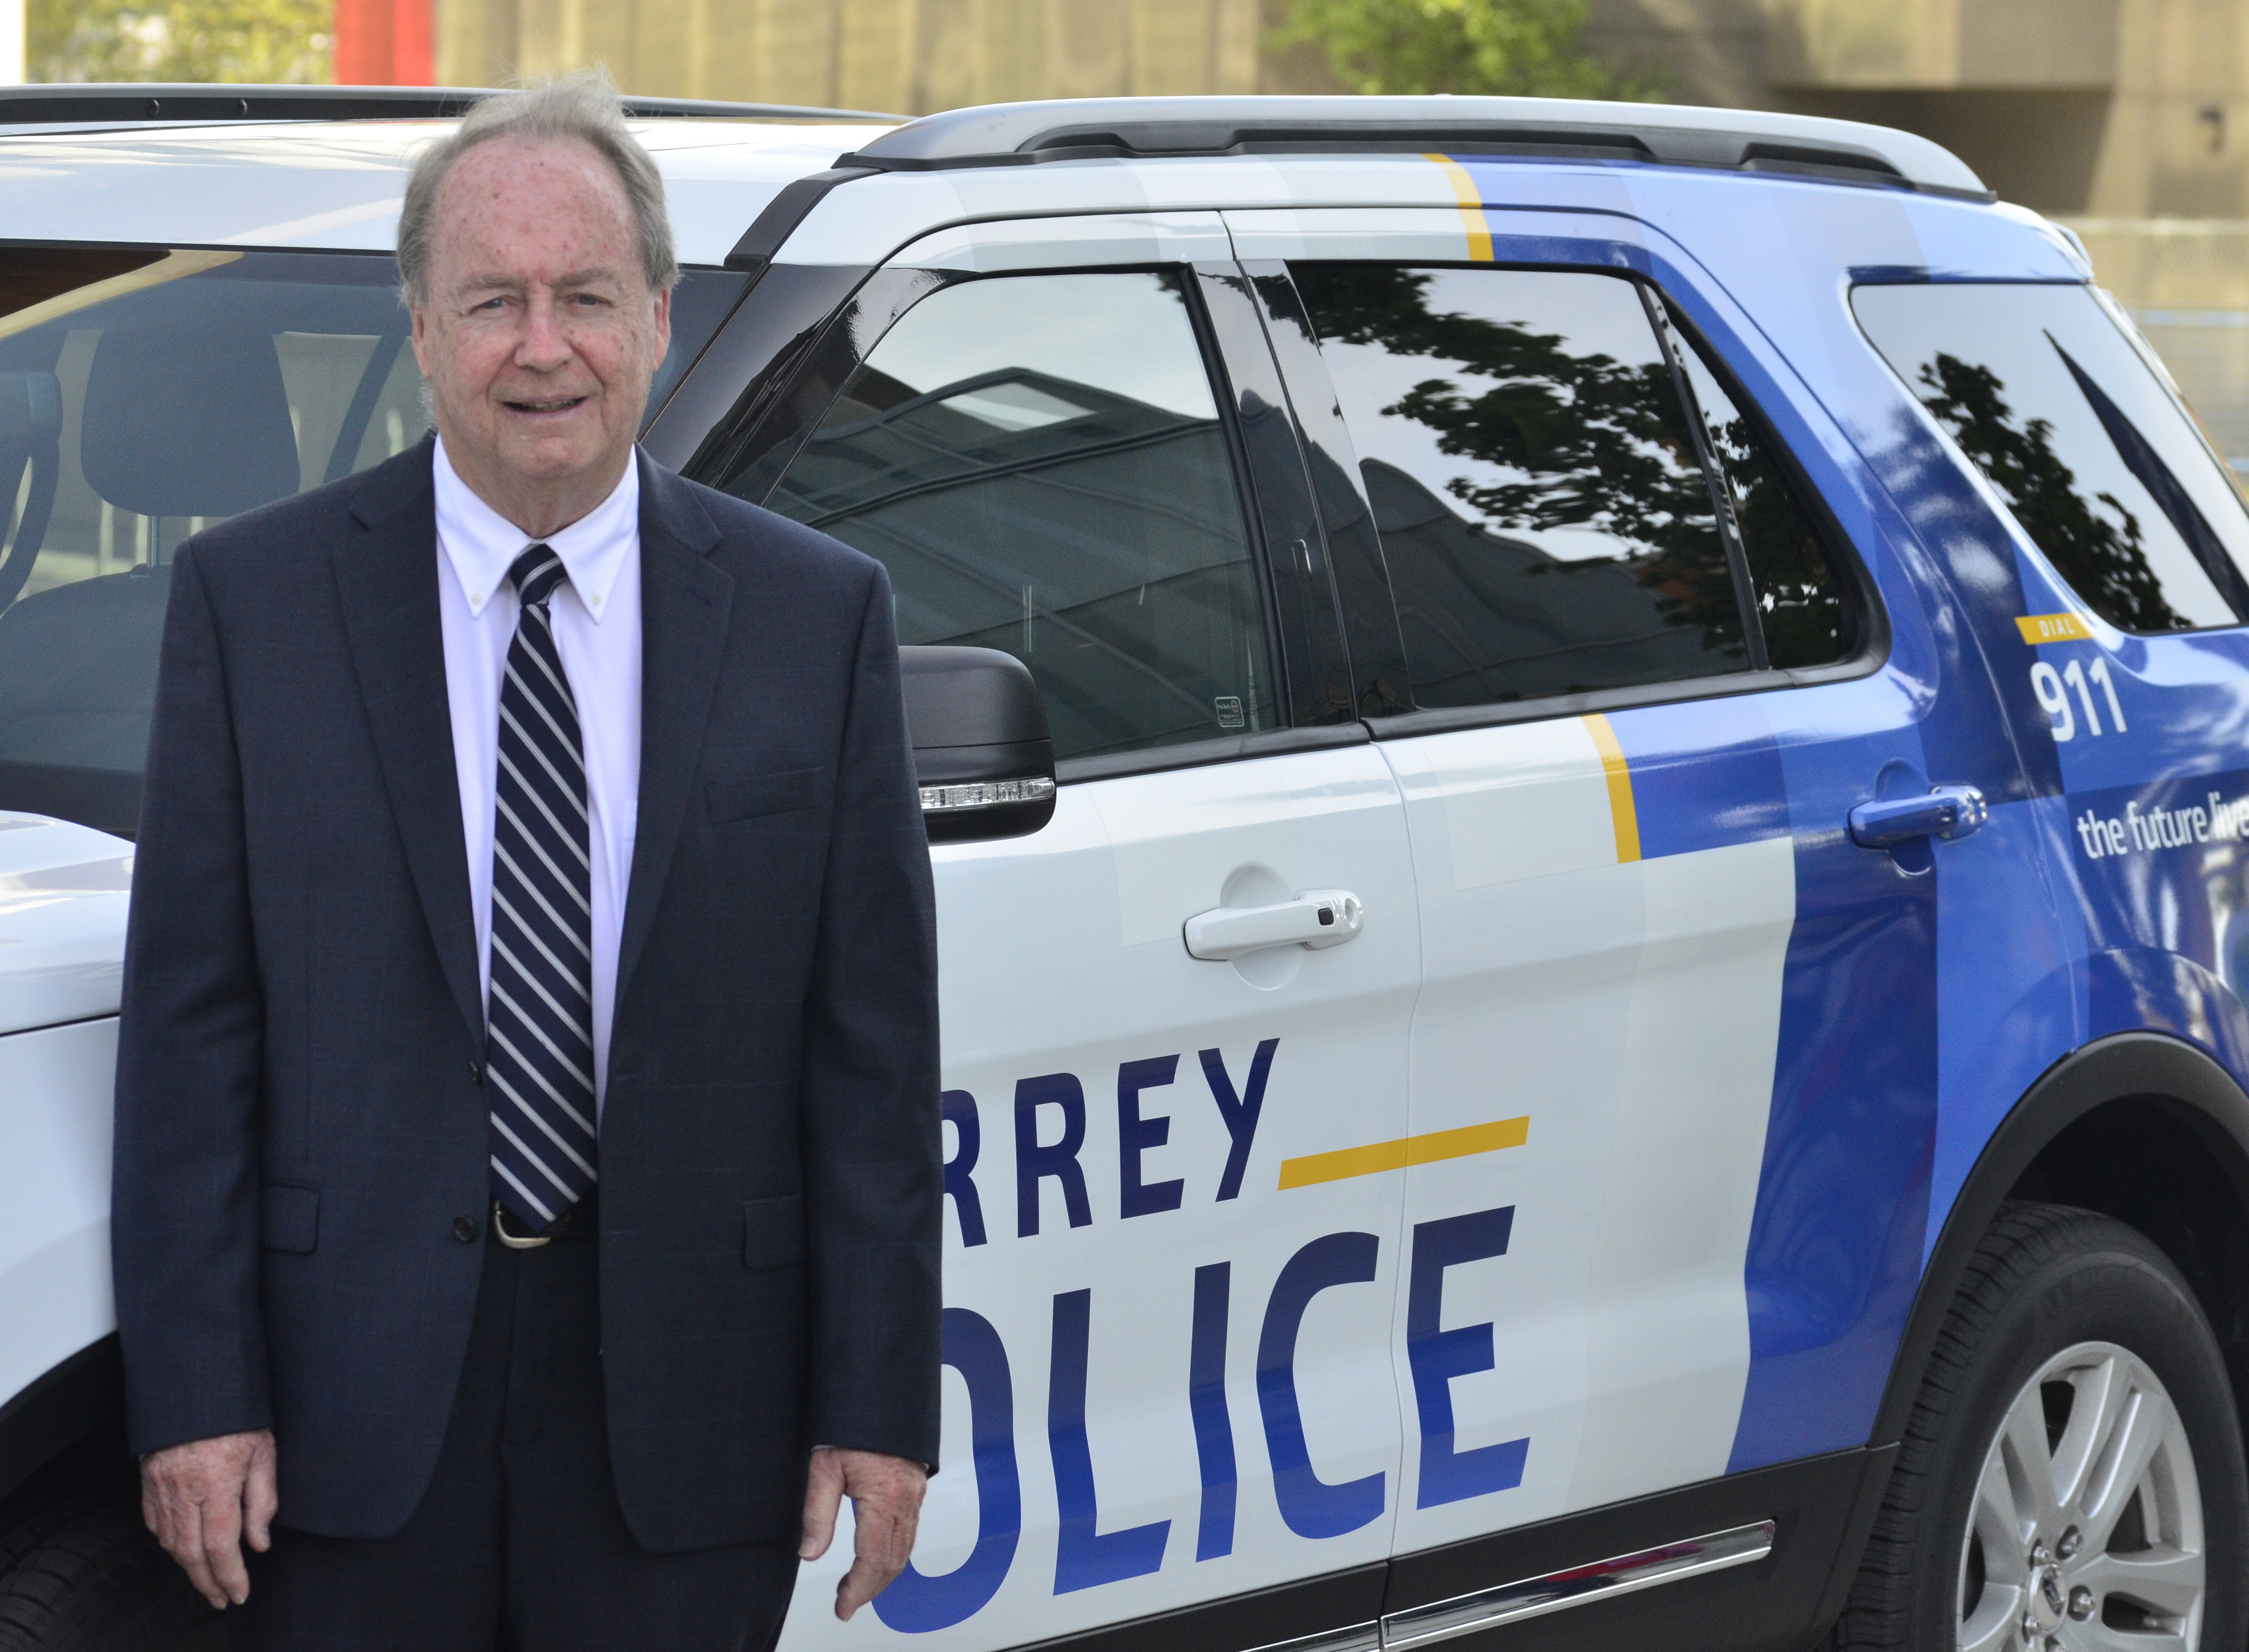 Surrey Police patrolling this city by July 2020, mayor says